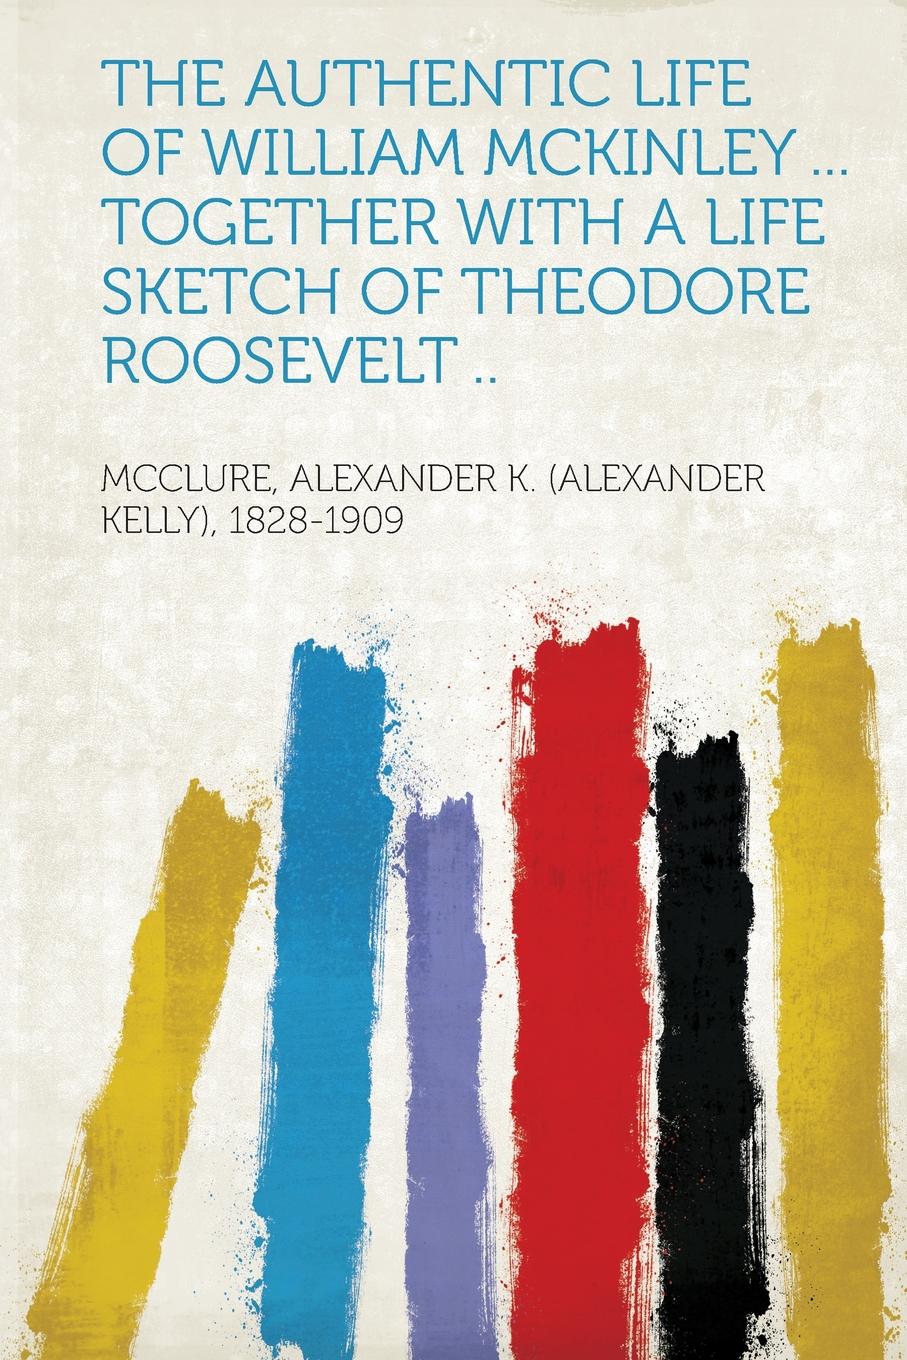 The Authentic Life of William Mckinley ... Together With a Life Sketch of Theodore Roosevelt ..